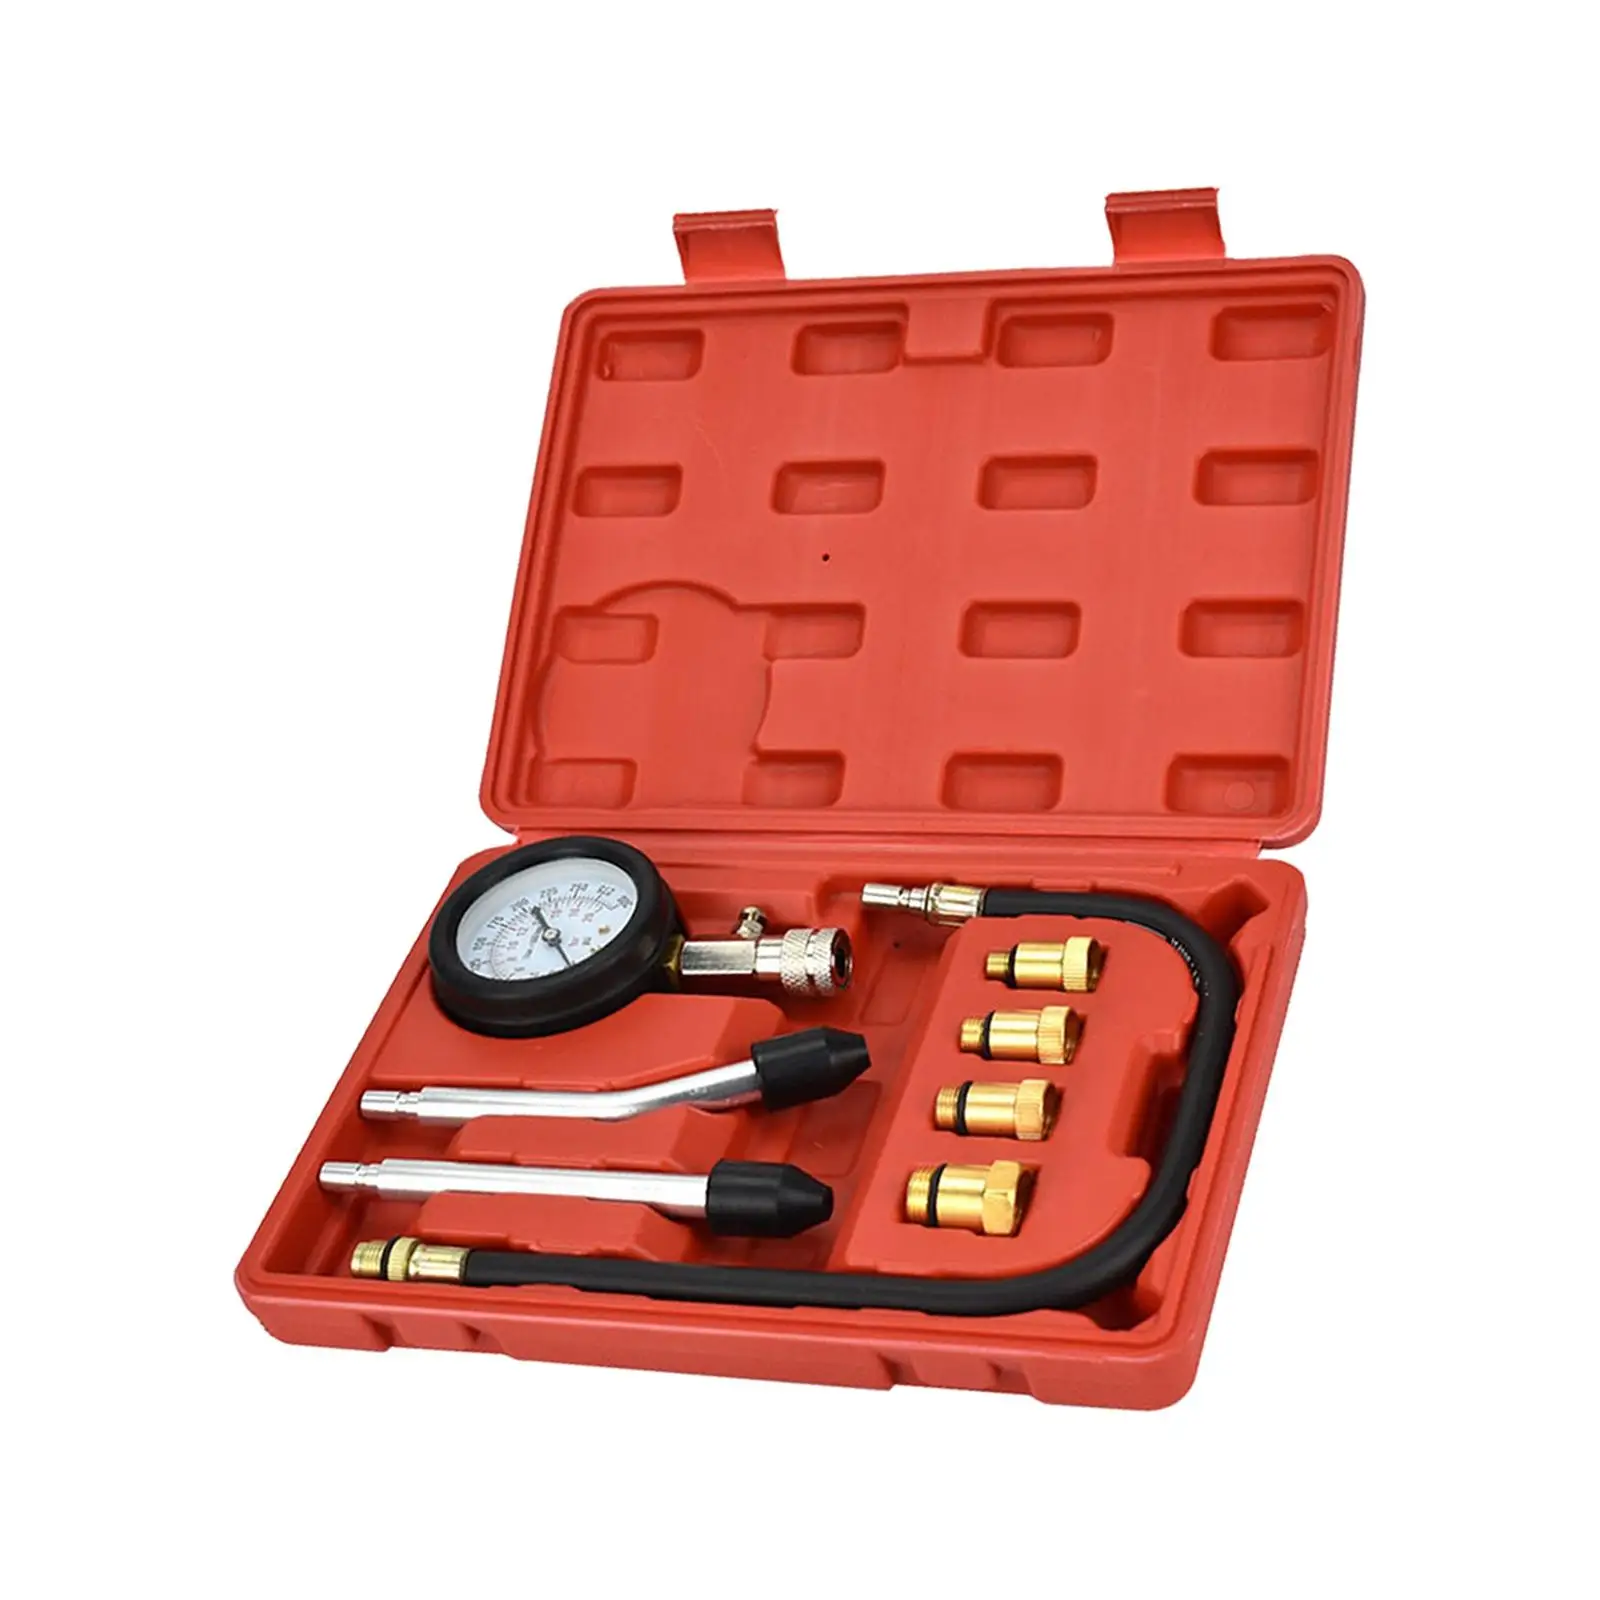 Set of 8 Petrol Engine Cylinder Compression Tester Tool with Carrying Case